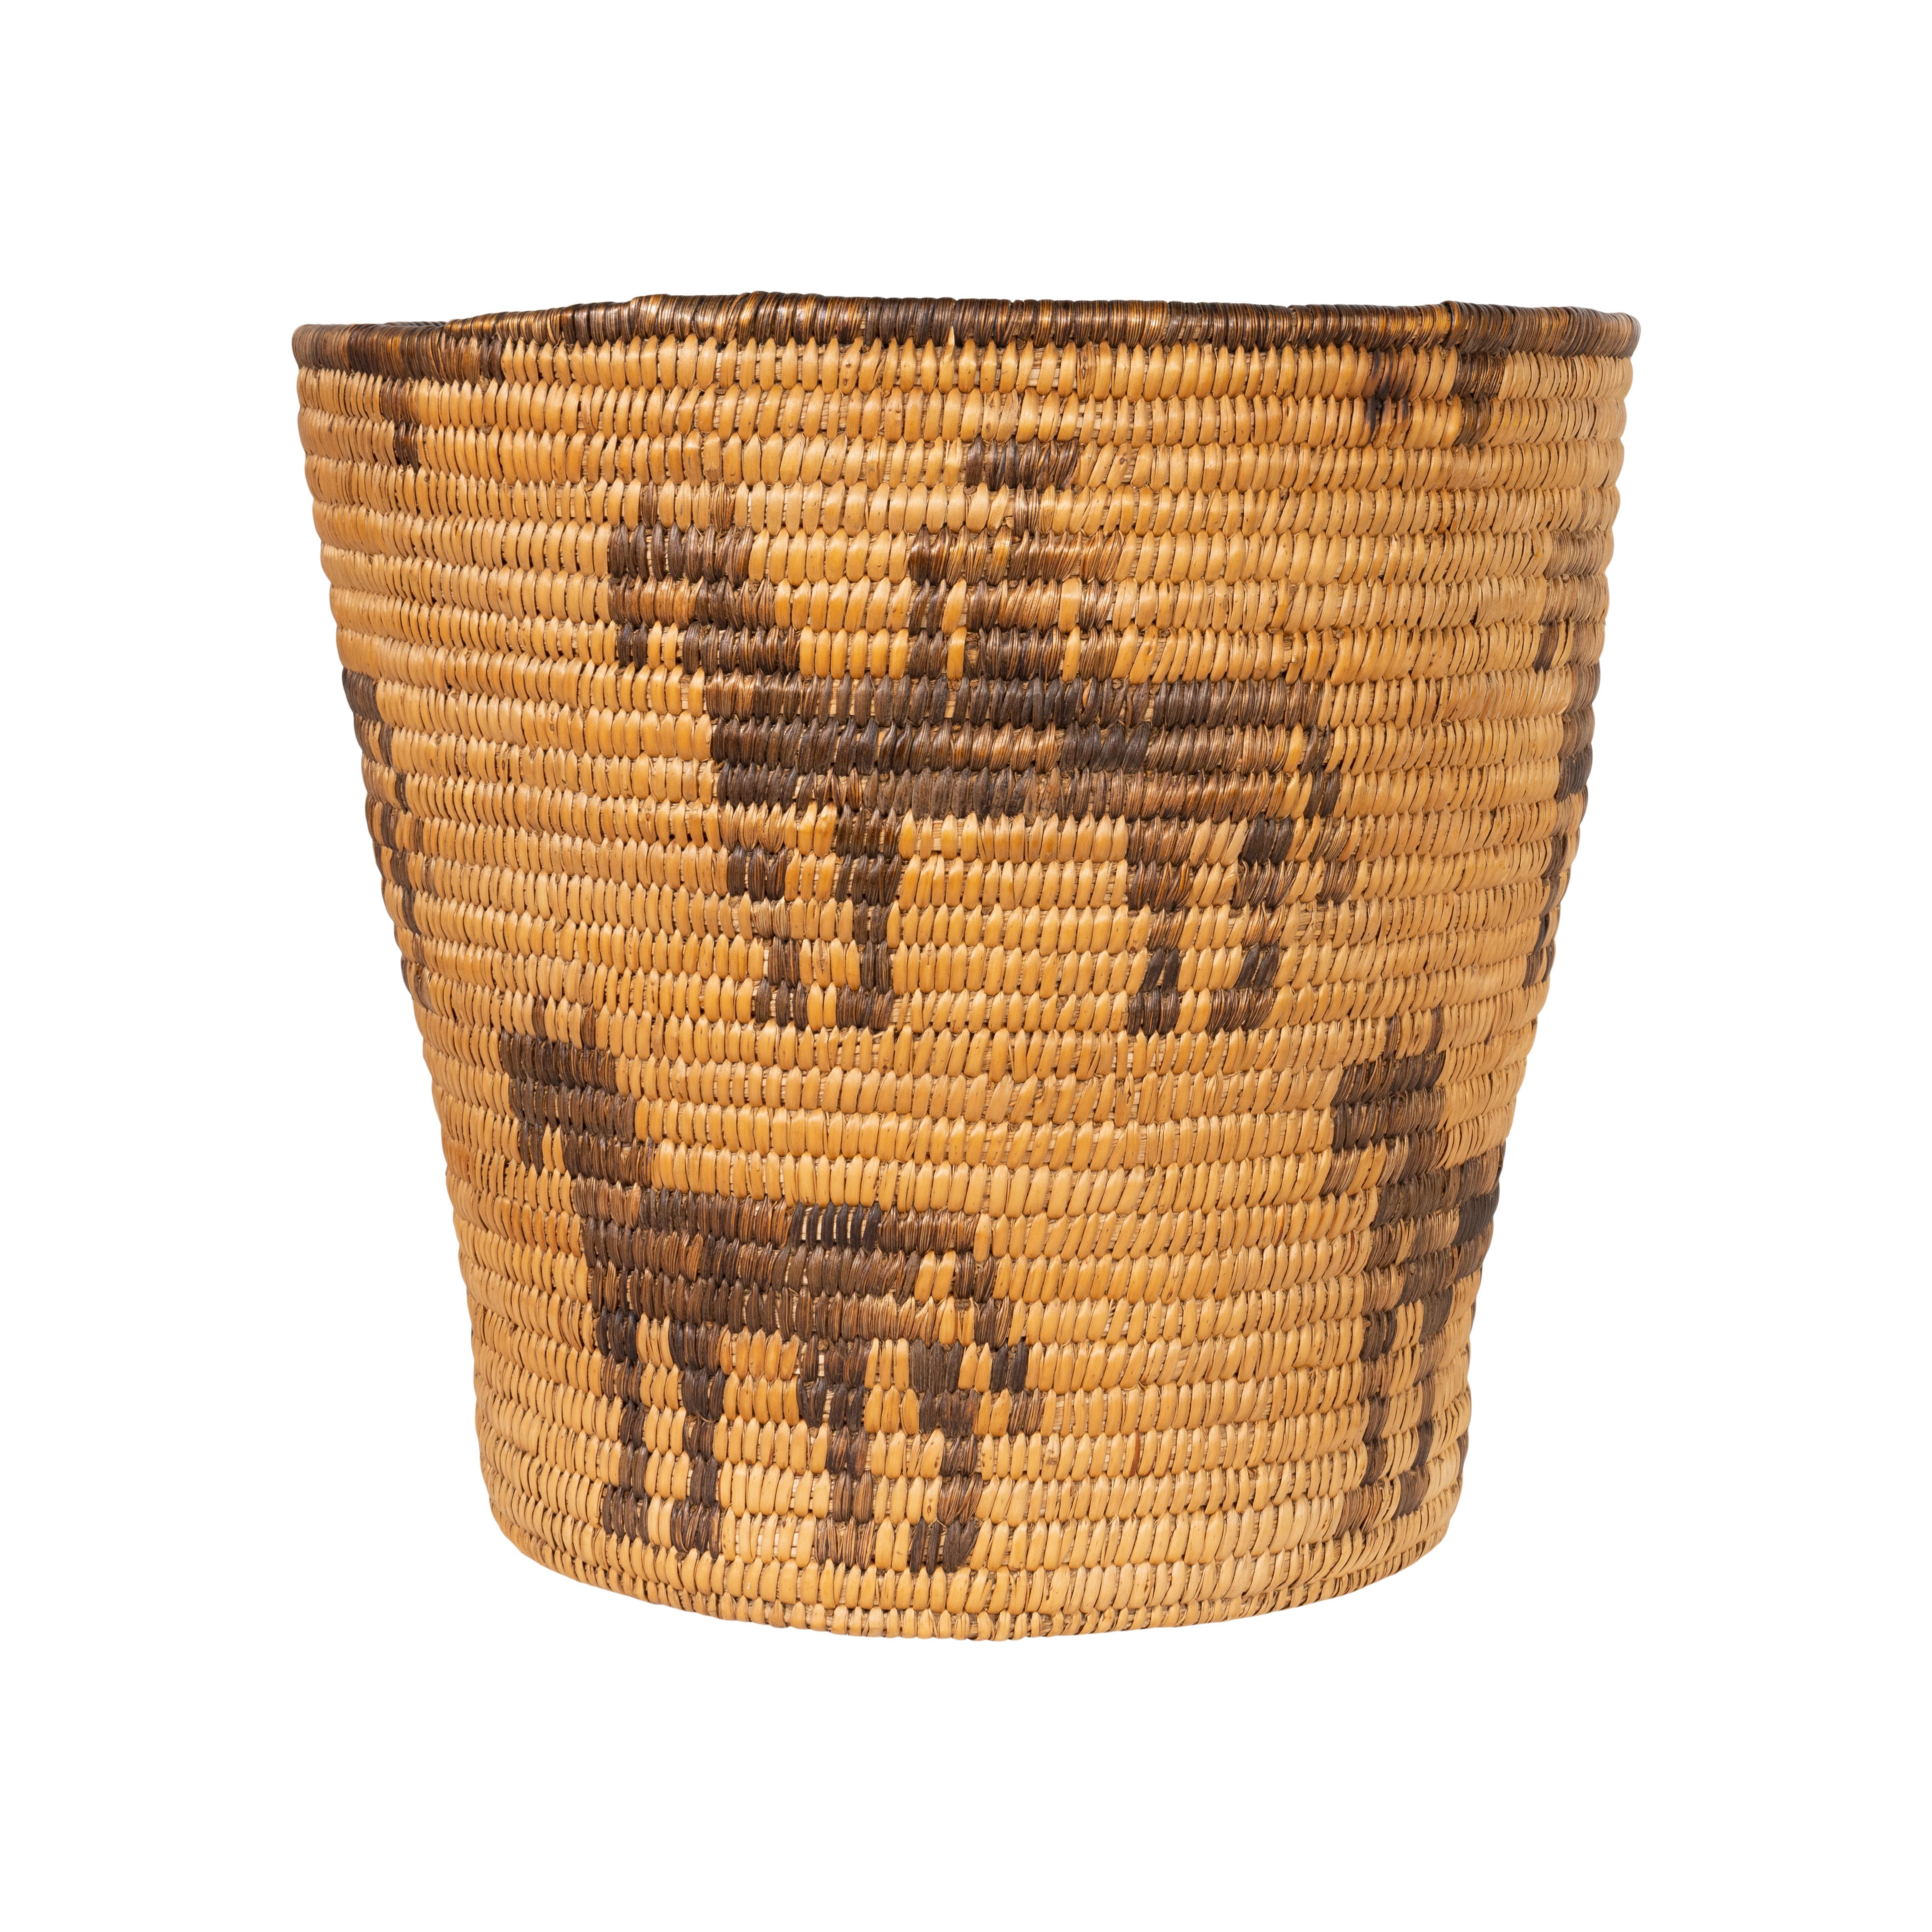 American Pictorial 1920s Pima Basket For Sale